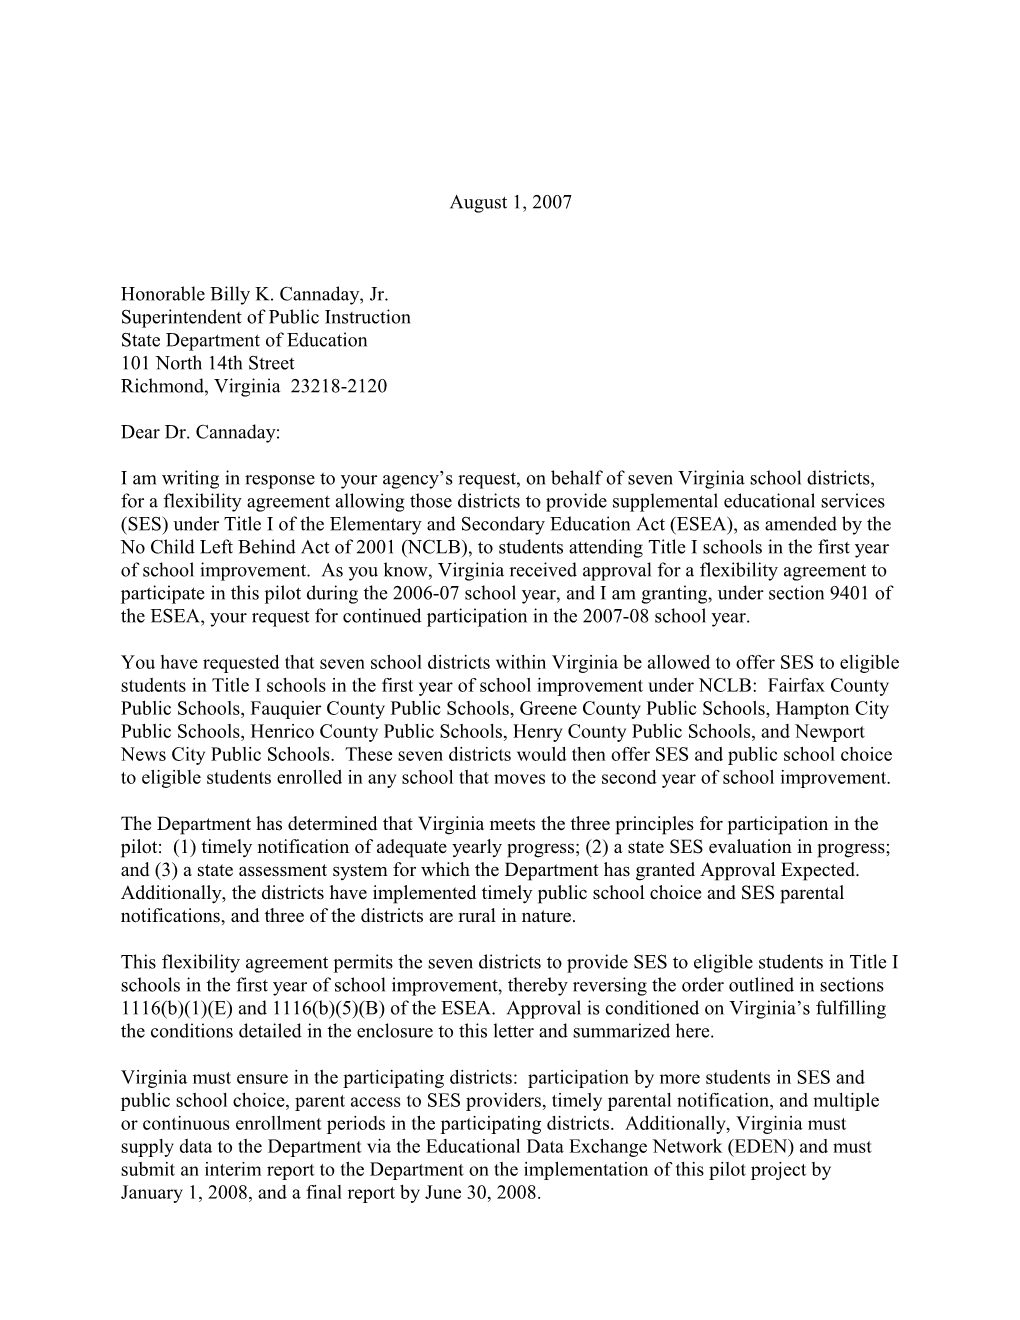 Letter to Virginia Superintendent Allowing Some of Thier Districts to Offer SES to Eligible